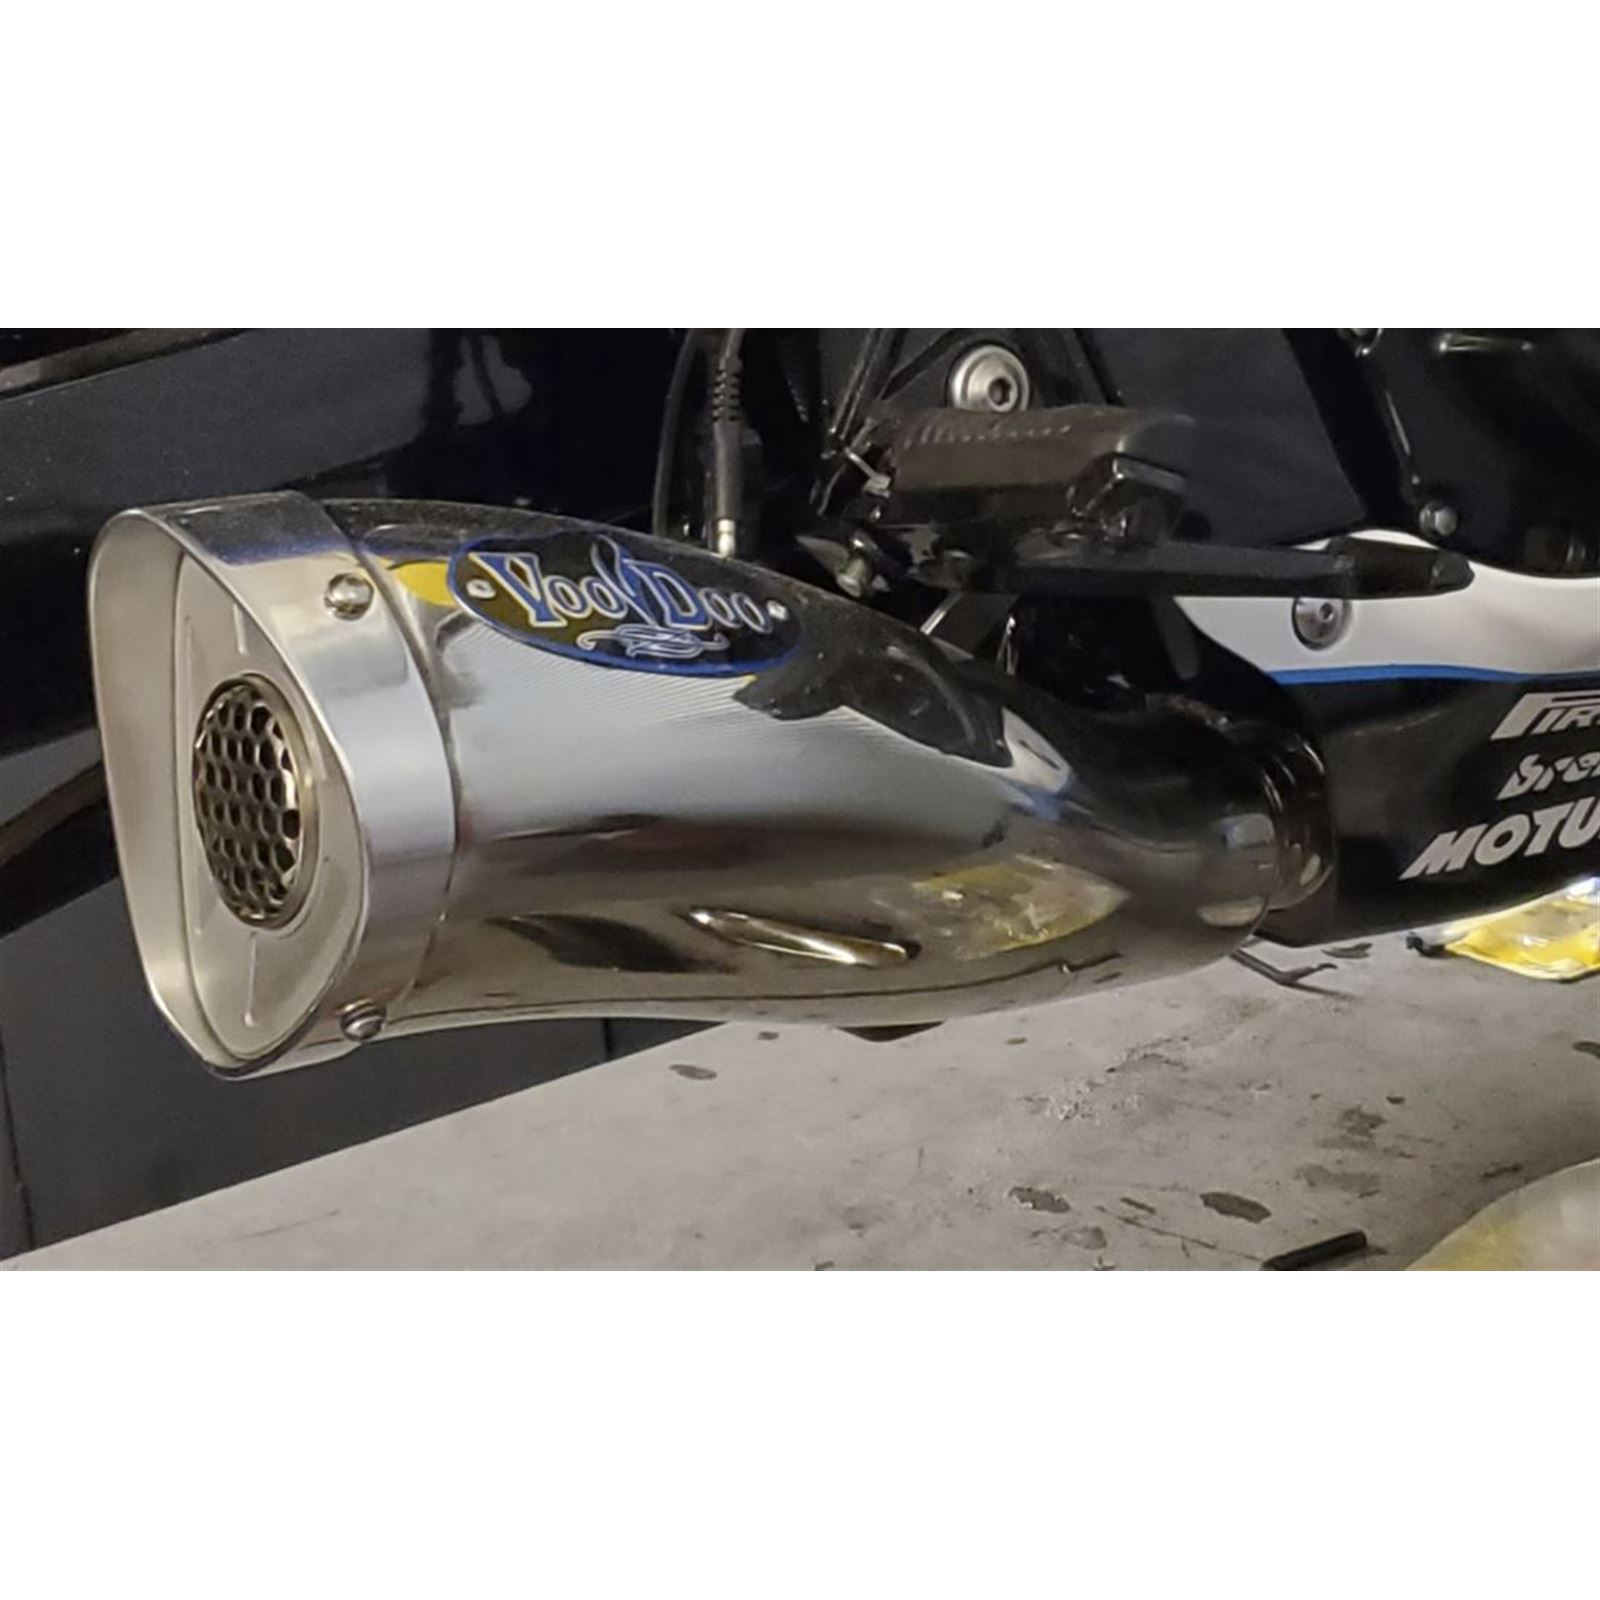 Voodoo Full 4 into 2 into 1 Race System, Mojo Muffler - Polished